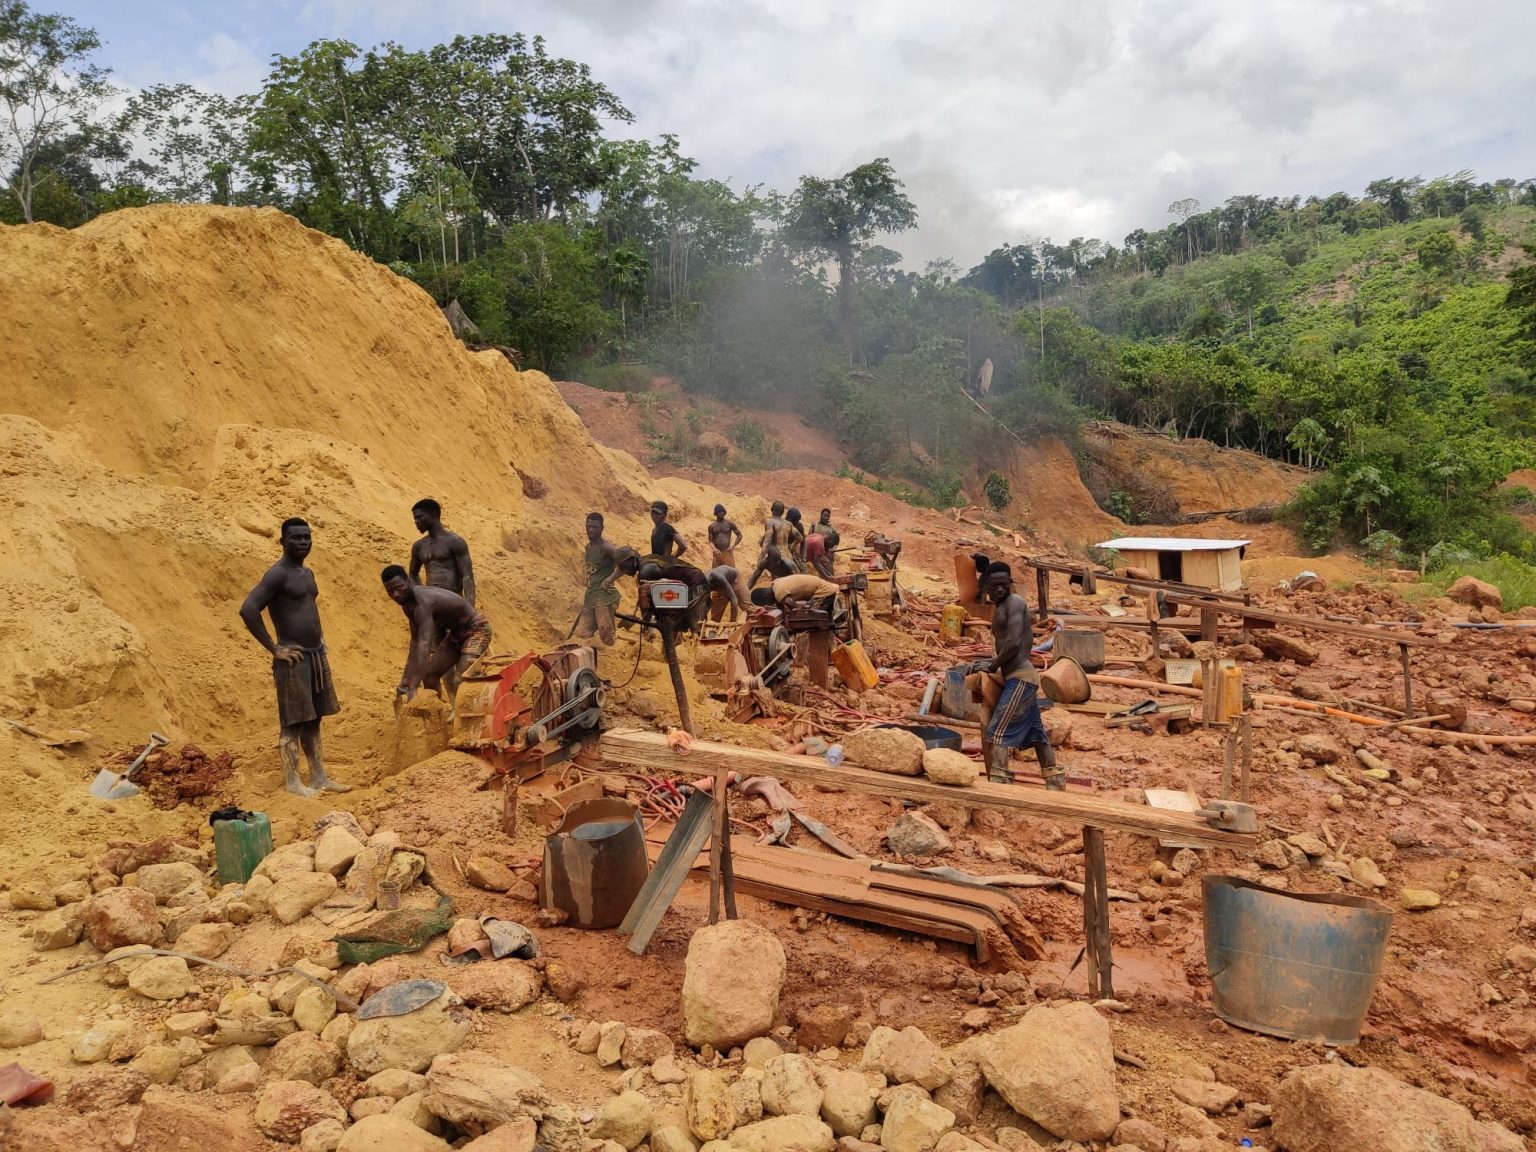 small scale miners in Ghana 02 | Commodity Monitor